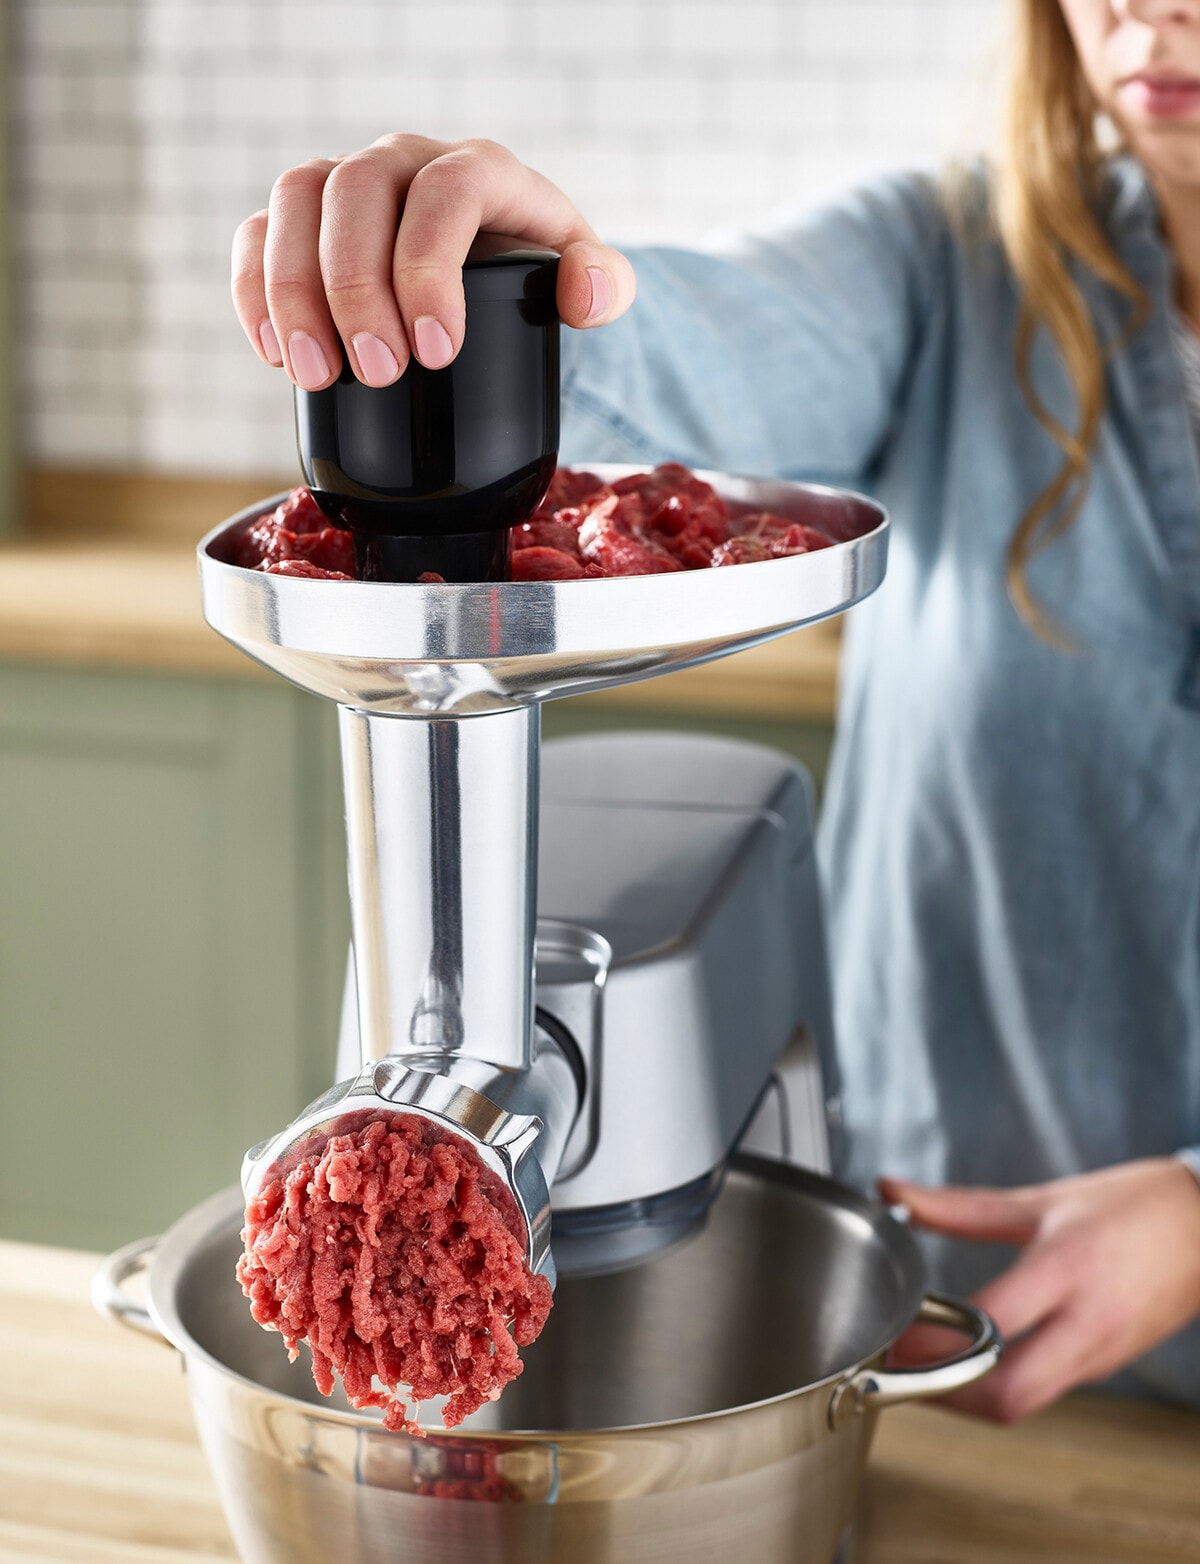 Kenwood Cooking Chef Attachments